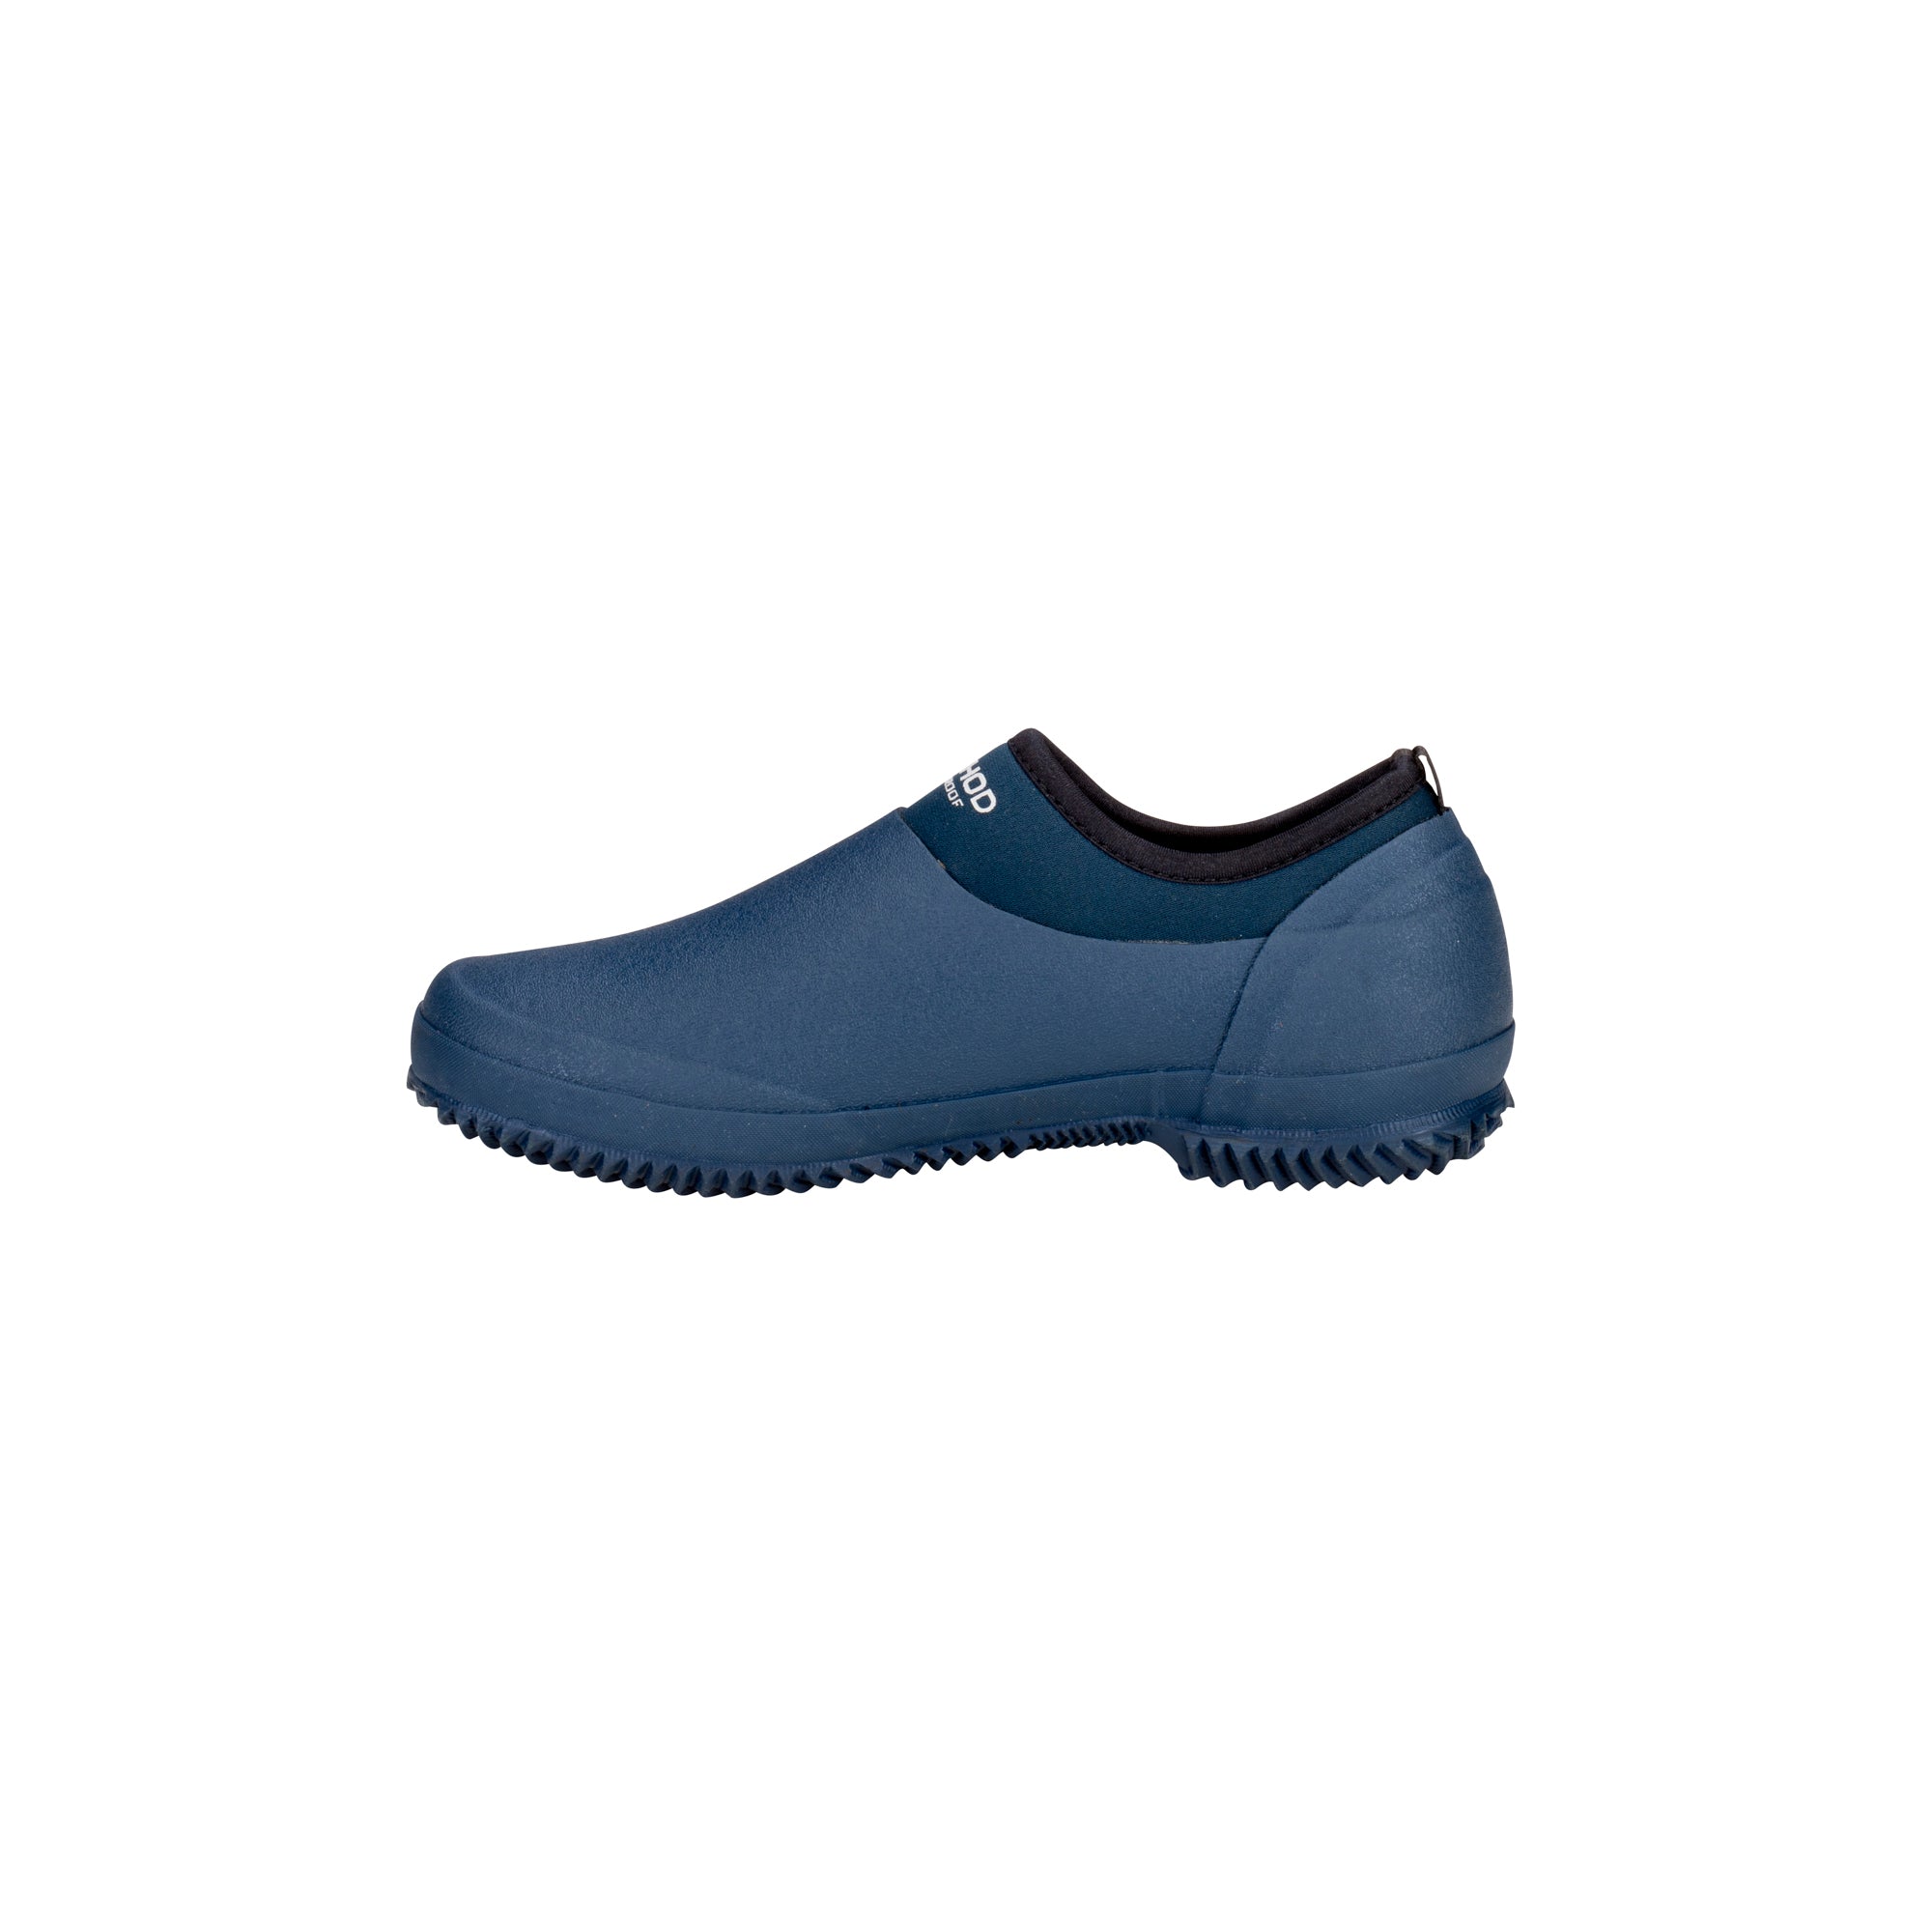 navy womens work shoes